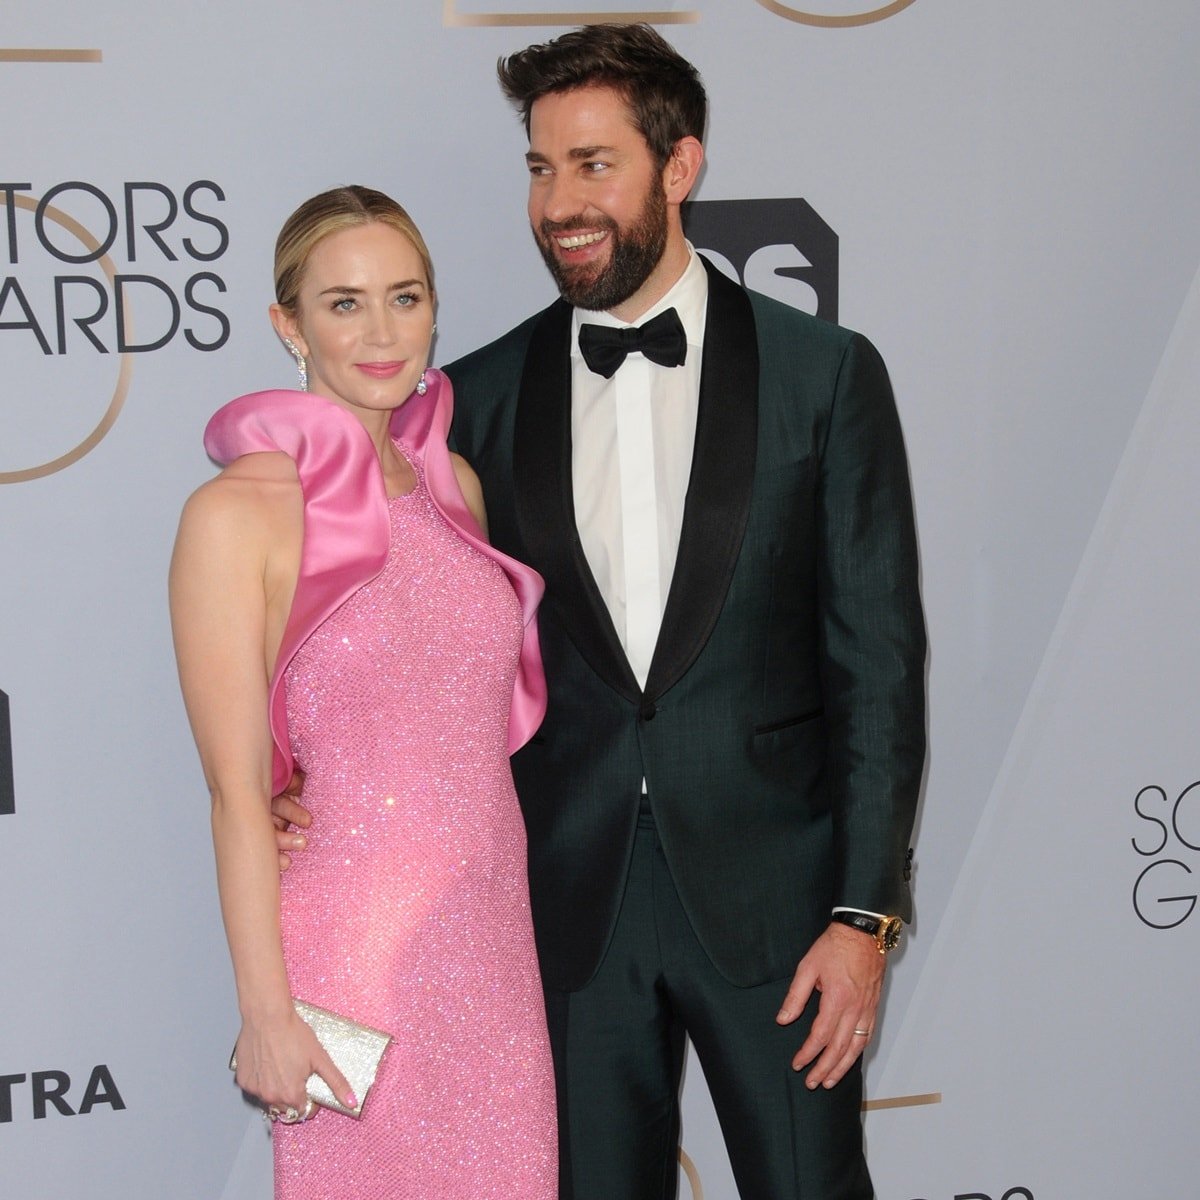 Emily Blunt, a highly accomplished British actress, and her husband, actor John Krasinski, have achieved significant success in their careers, resulting in a combined net worth of $80 million